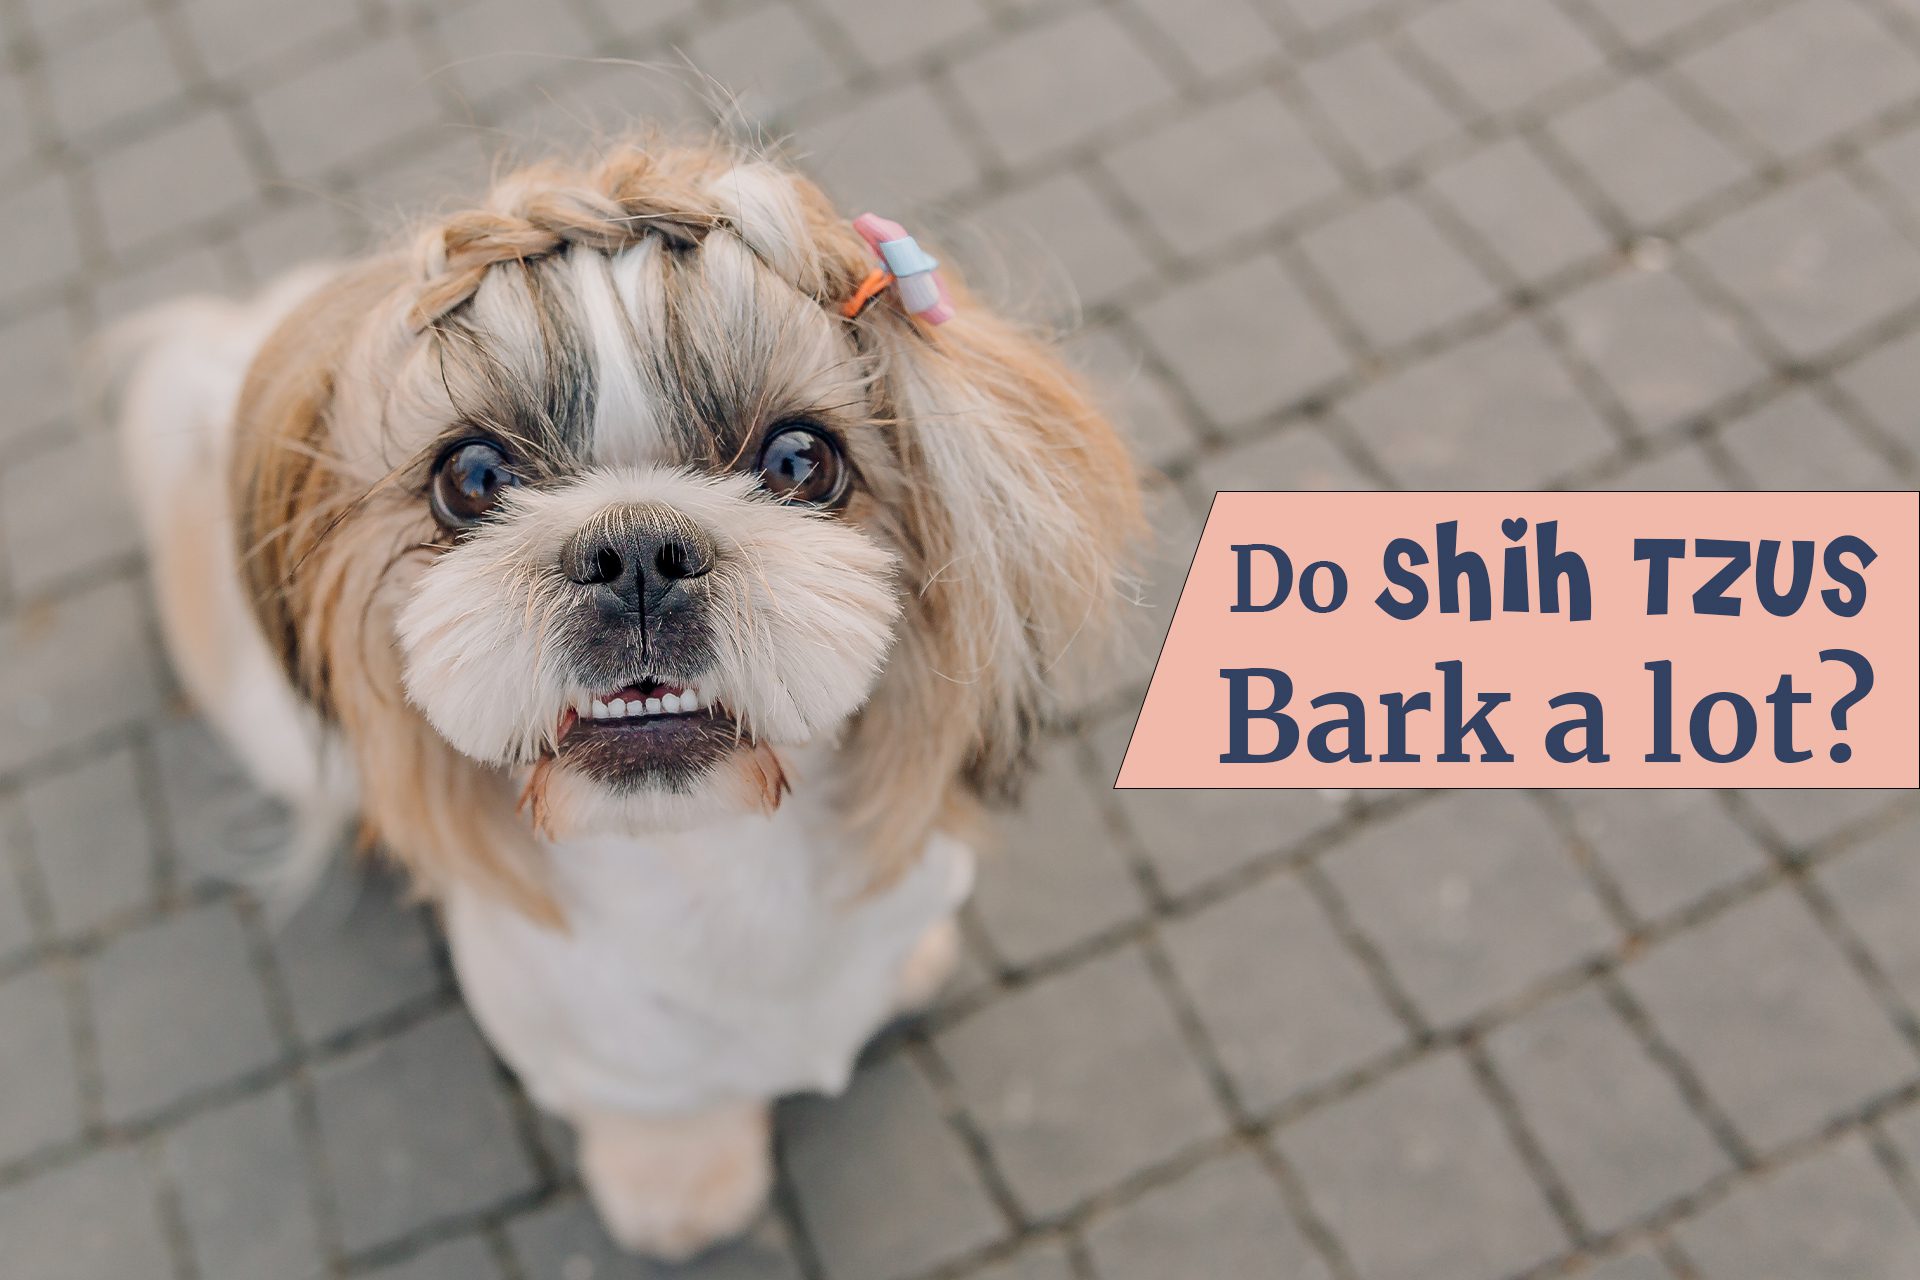 Do Shih Tzus bark a lot? When it comes to why Shih Tzus bark a lot, the main reasons are fear, boredom, anxiety, or frustration. If you think your dog falls into one of these categories, there are some things you can do to help them feel more comfortable and stop excessive barking. With a little patience and training, your dog can learn to stop barking excessively and be happier and healthier as a result.